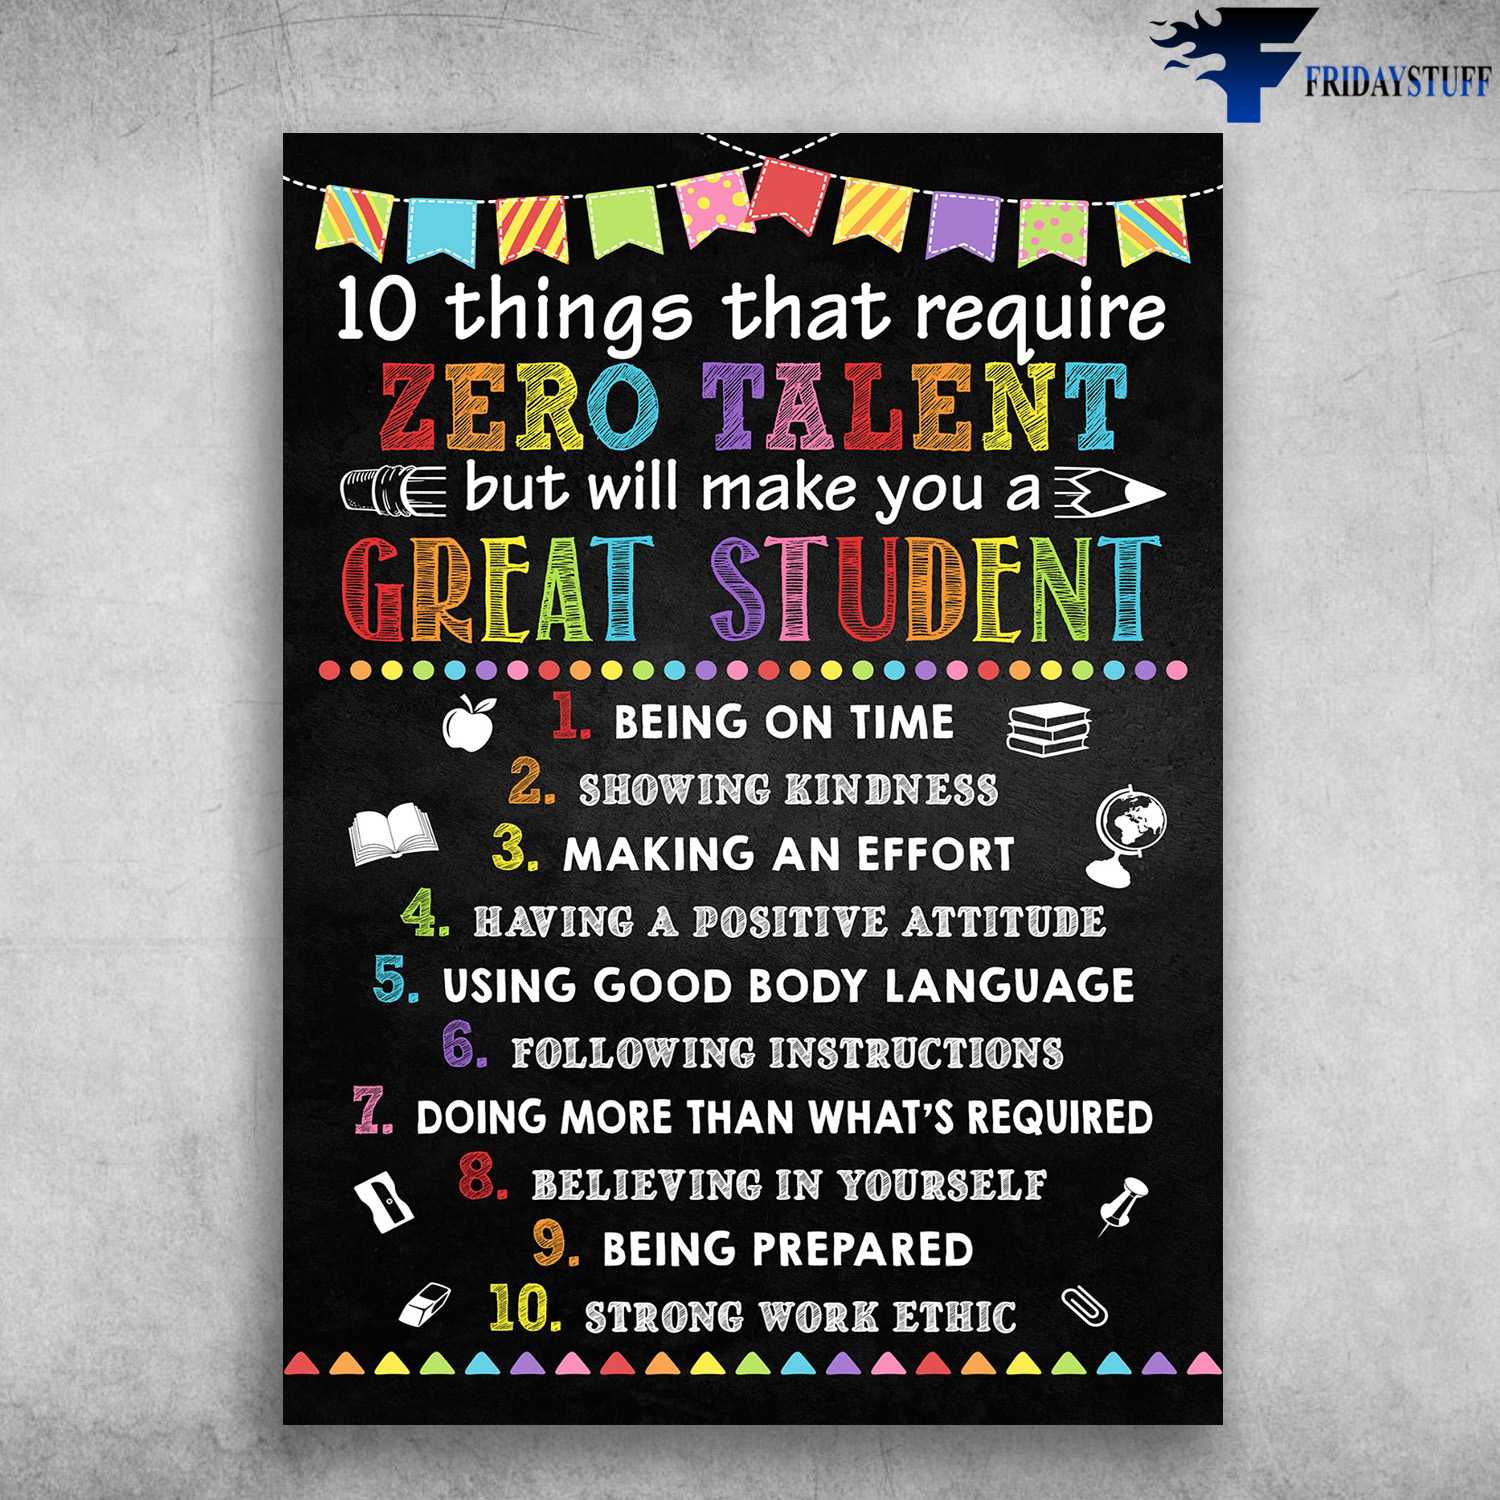 Classroom Rules, 10 Things That Require Zero Talent, But Will Make You A Great Student, Being On Time, Showing Kindness, Making An Effort, Having A Positive Attitude